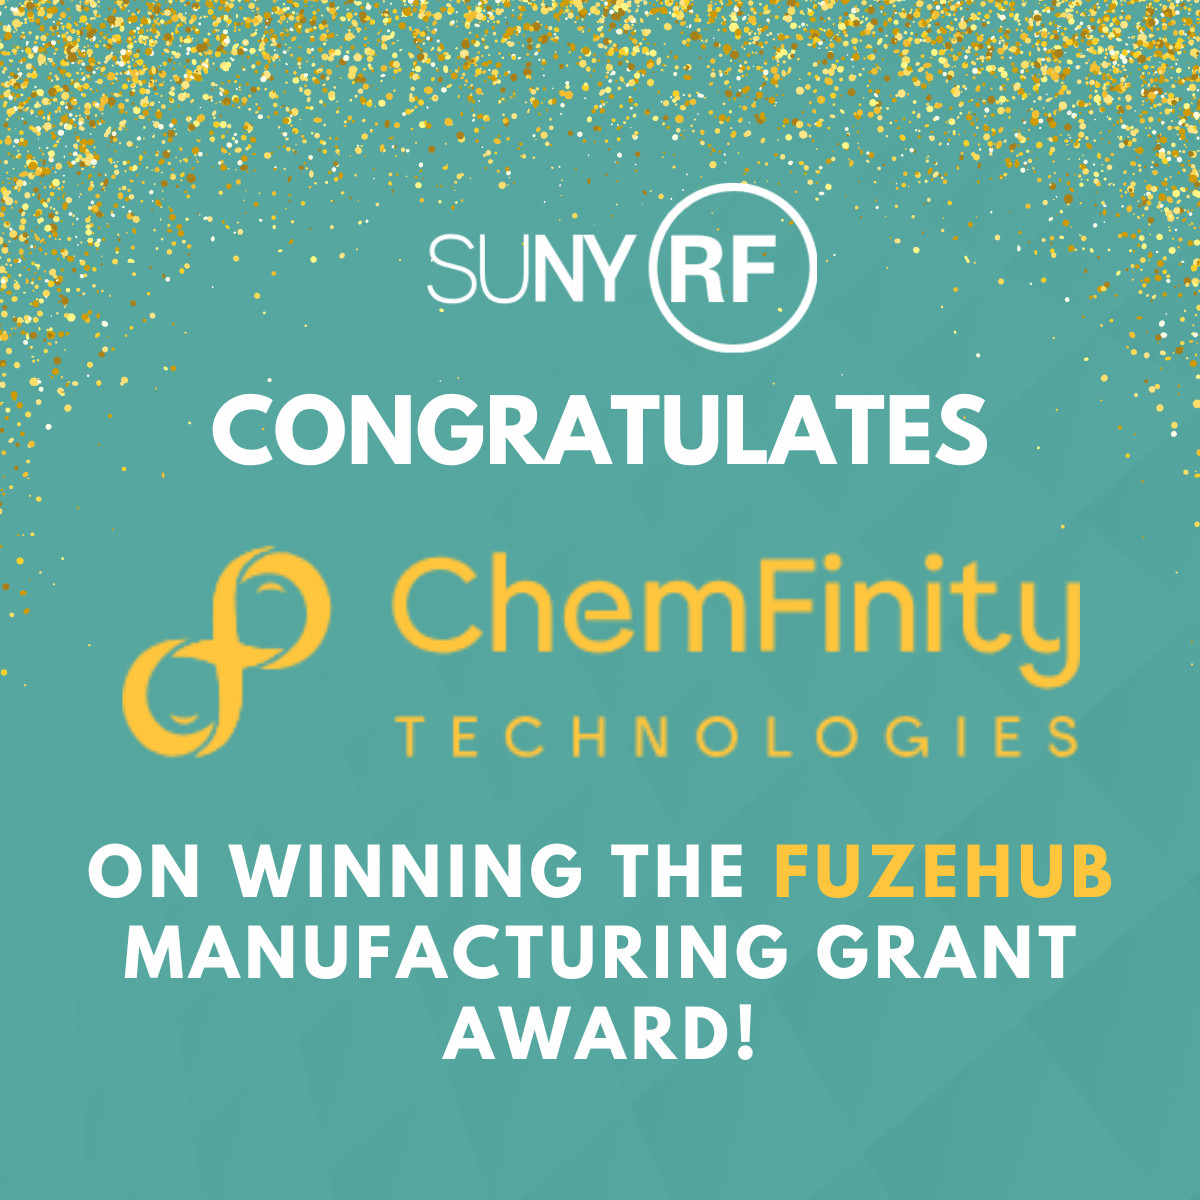 Congratulations to Adam Uliana and the entire ChemFinity Technologies team on winning one of the @Fuzehub Manufacturing Grant Awards! Learn more: fuzehub.com/fuzehub-announ…